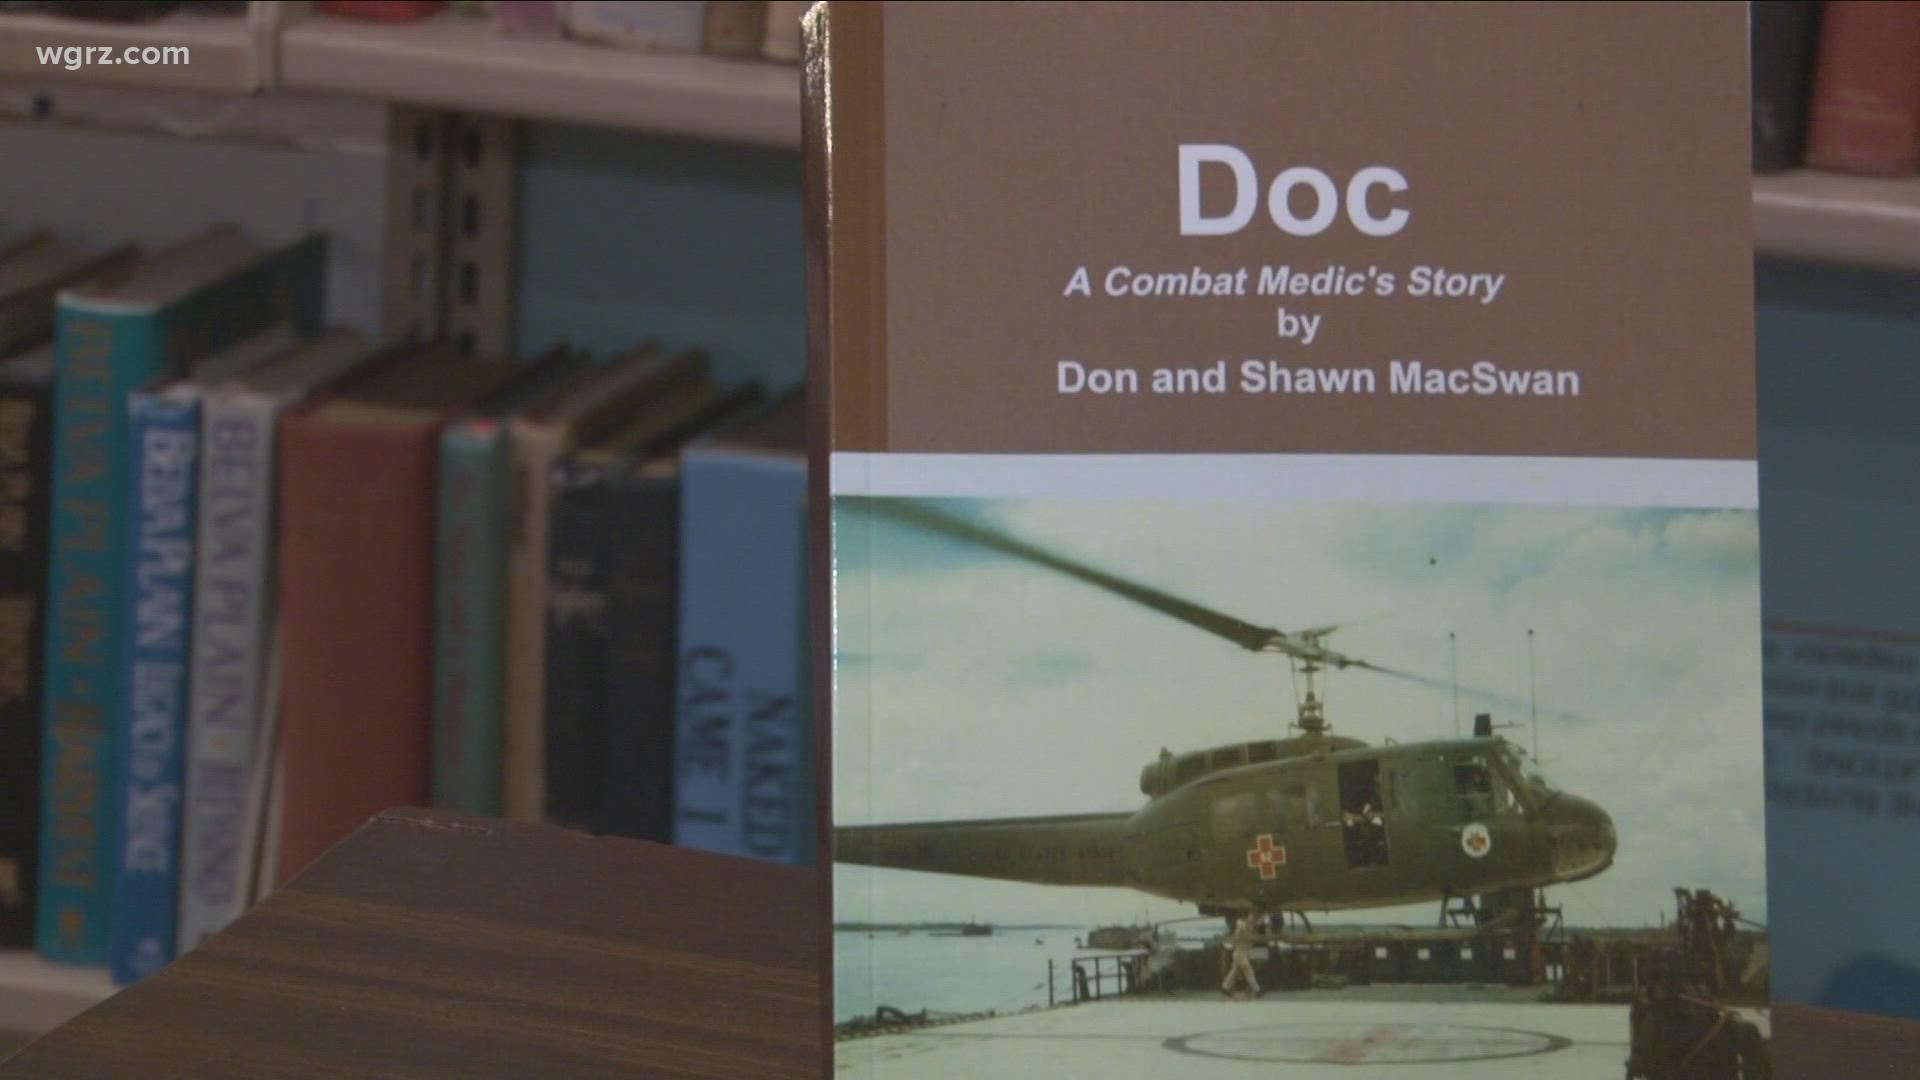 A special event was held Tuesday evening to recognize veterans who served in the Vietnam War.